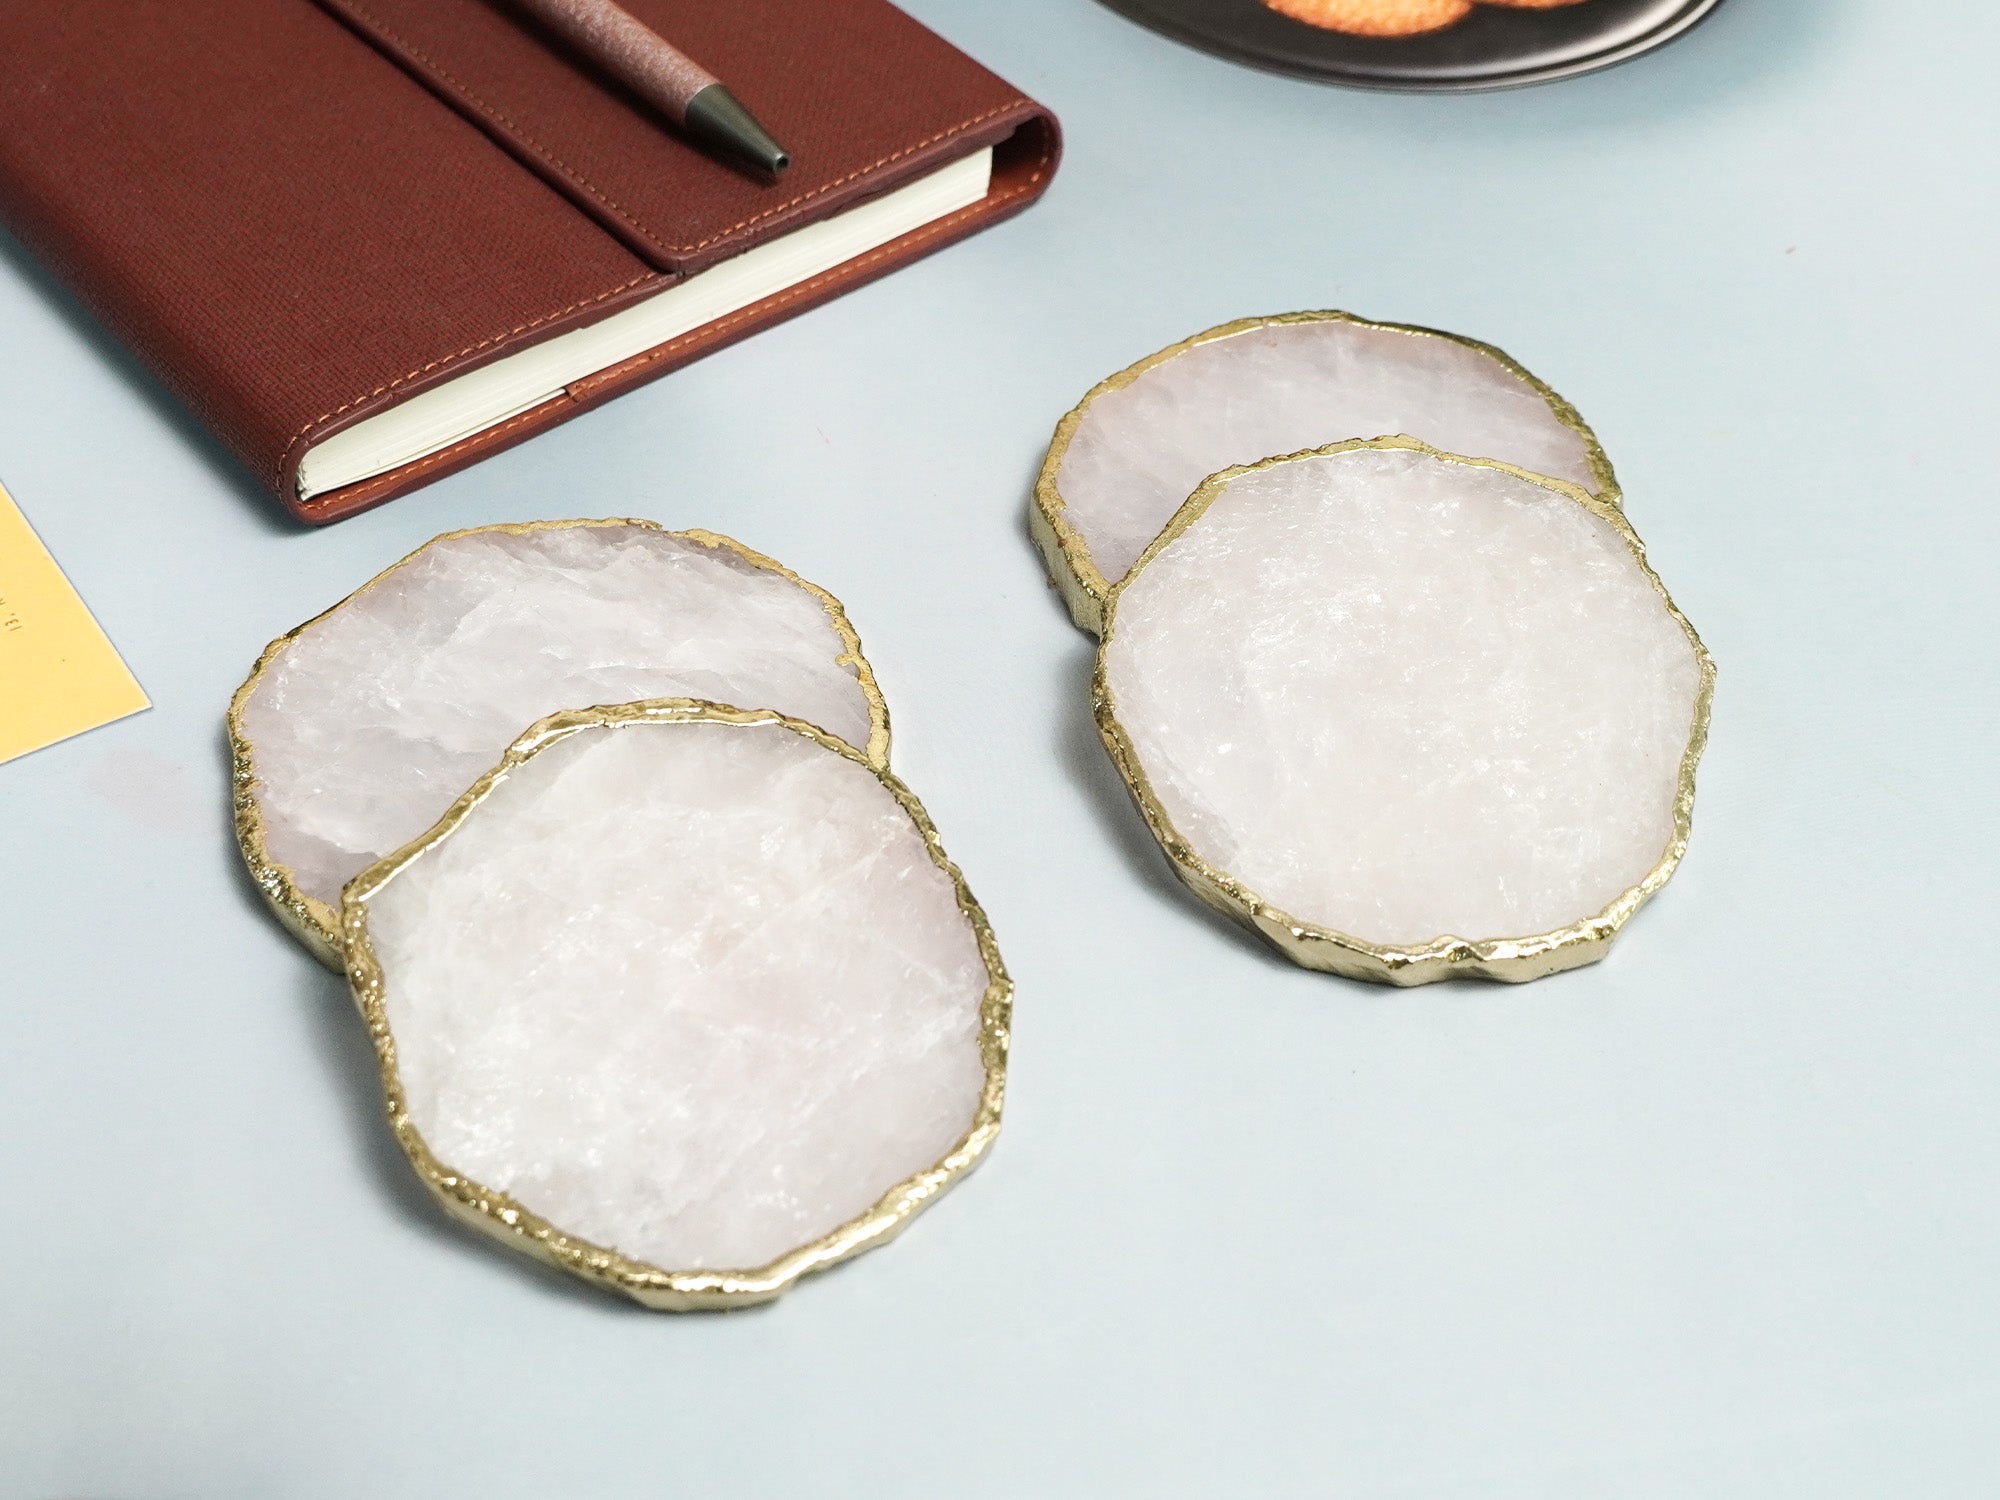 Belgium BIBELOT Agate Handcrafted Luxury Gold Plated Coasters (Circle, Eggshell White)